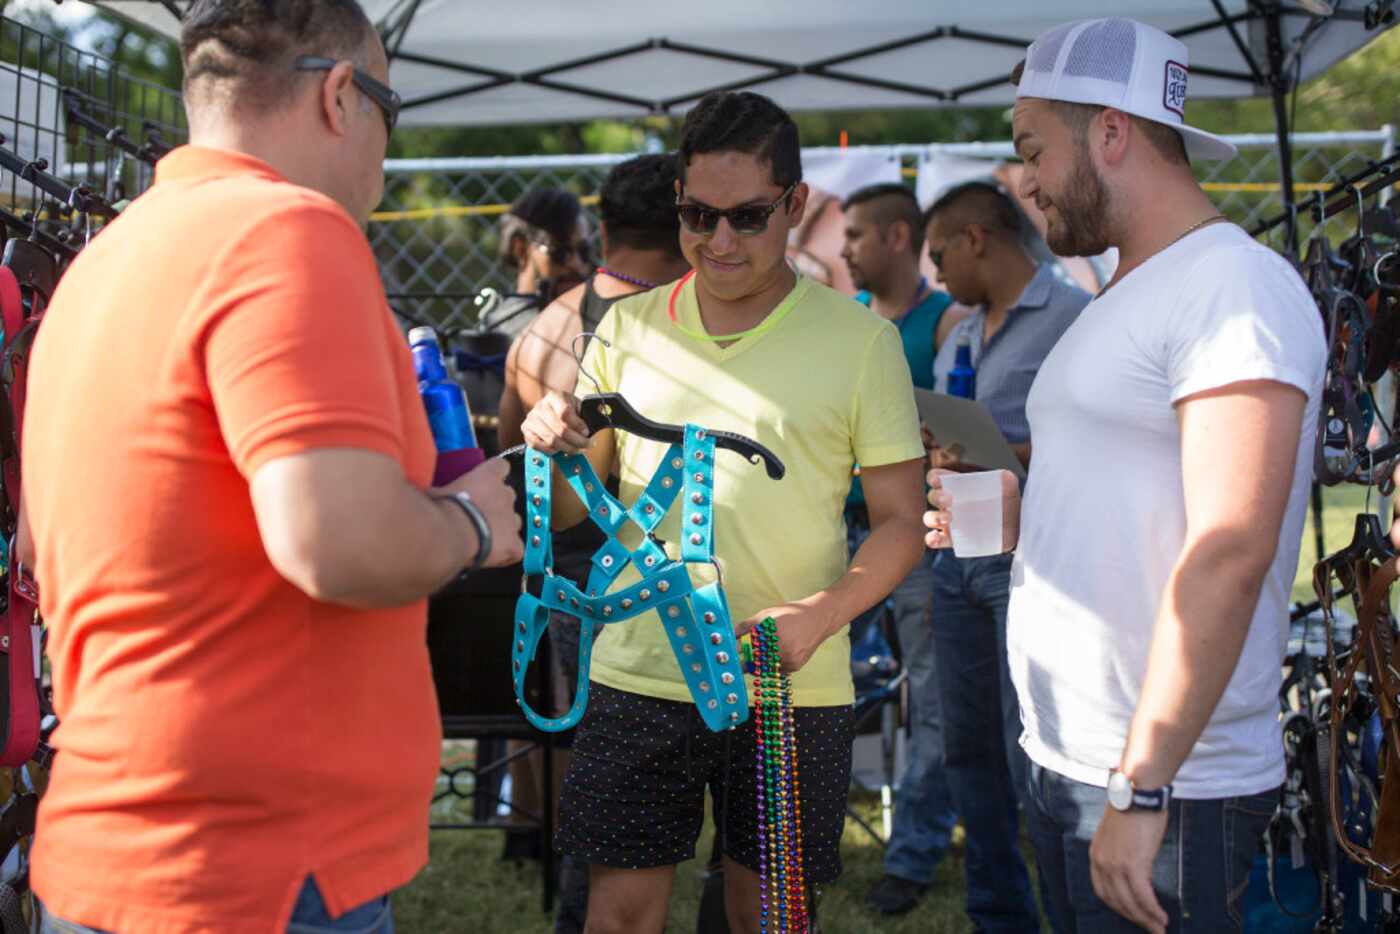 Alvin Alarcon (center) of Dallas inspects a harness during the Texas Latino Gay Pride...